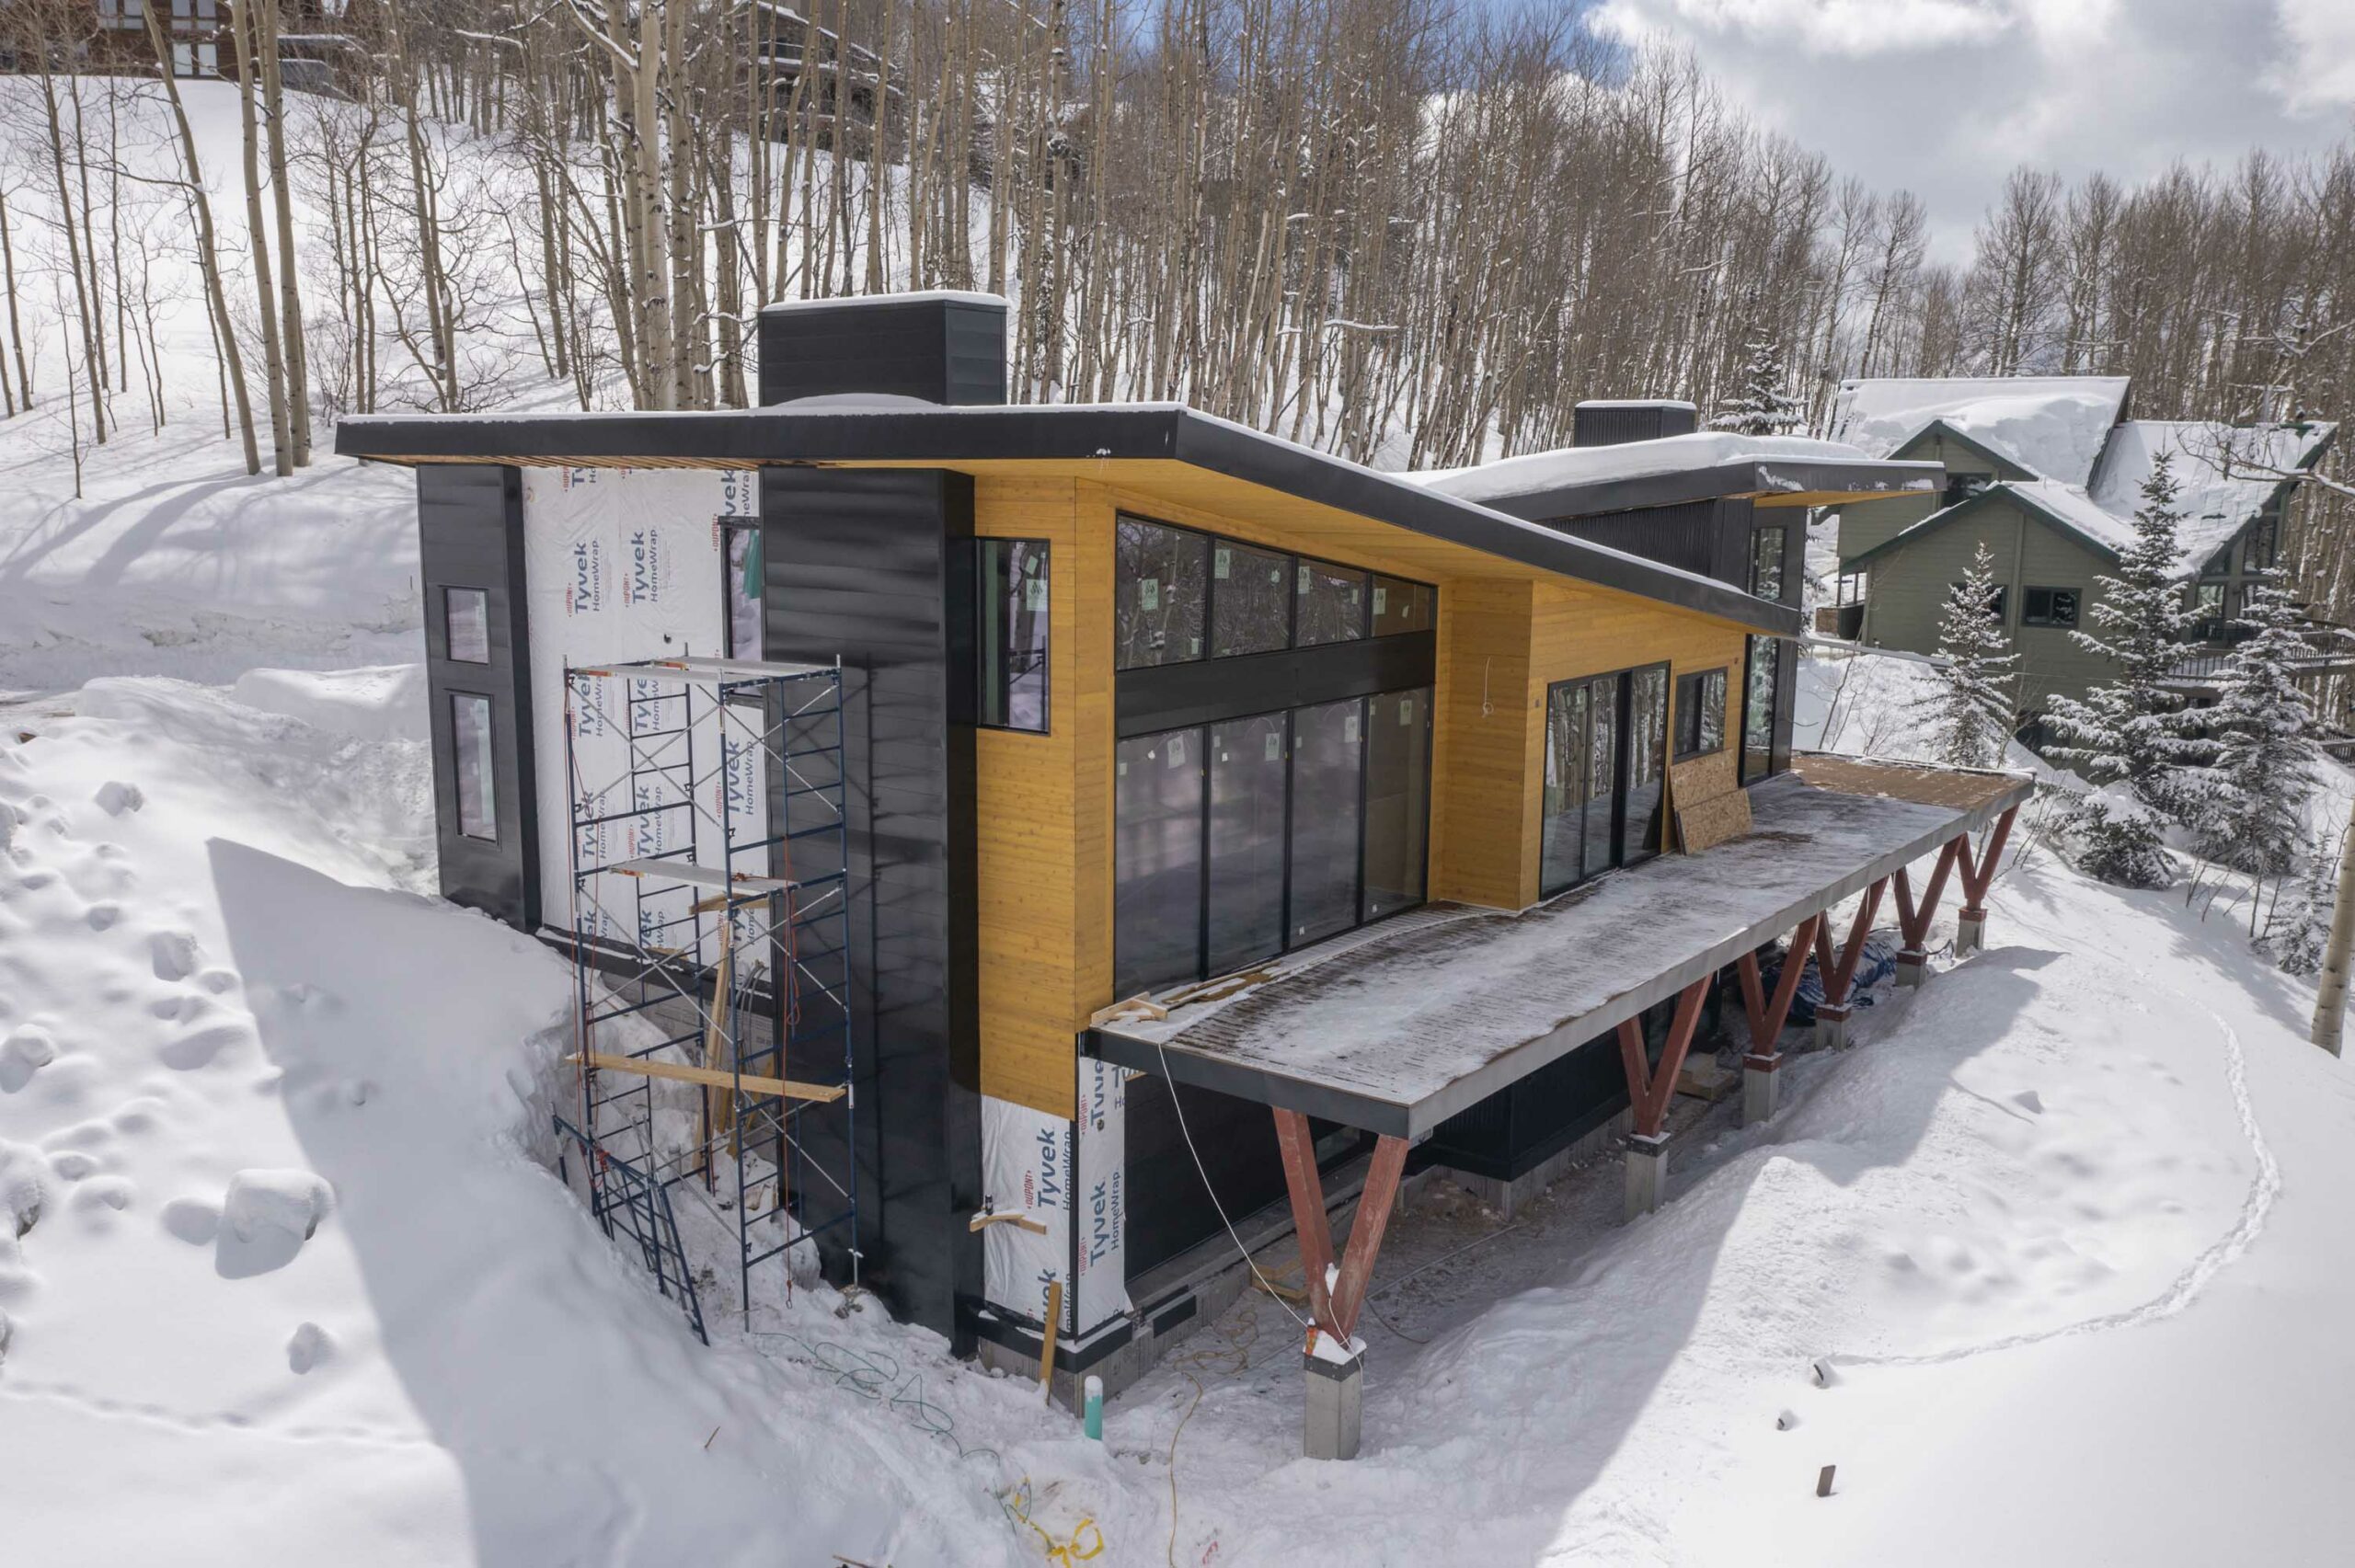 38 Ruby Drive Mt. Crested Butte, Colorado - exterior drone view